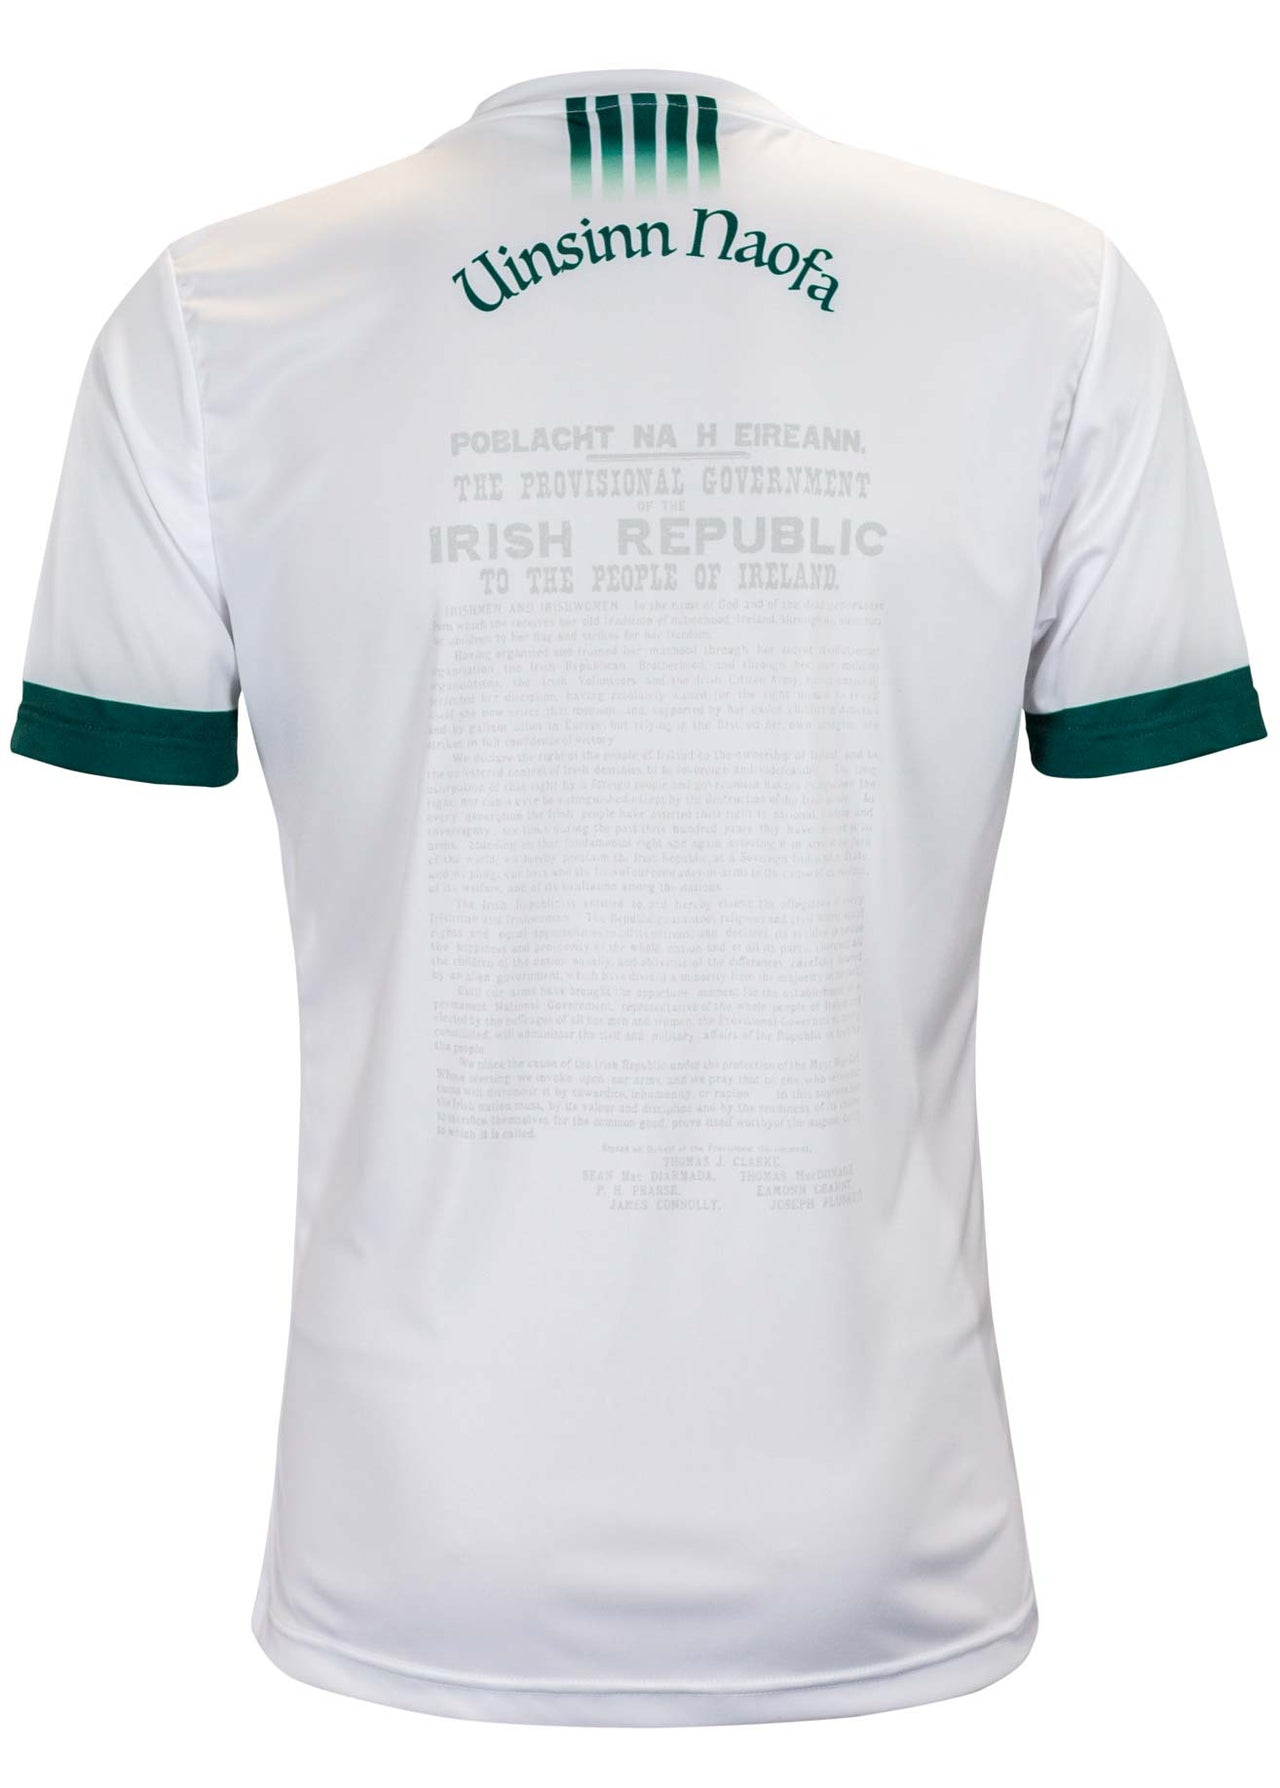 St Vincent's White Commemorative Jersey Player Fit Adult